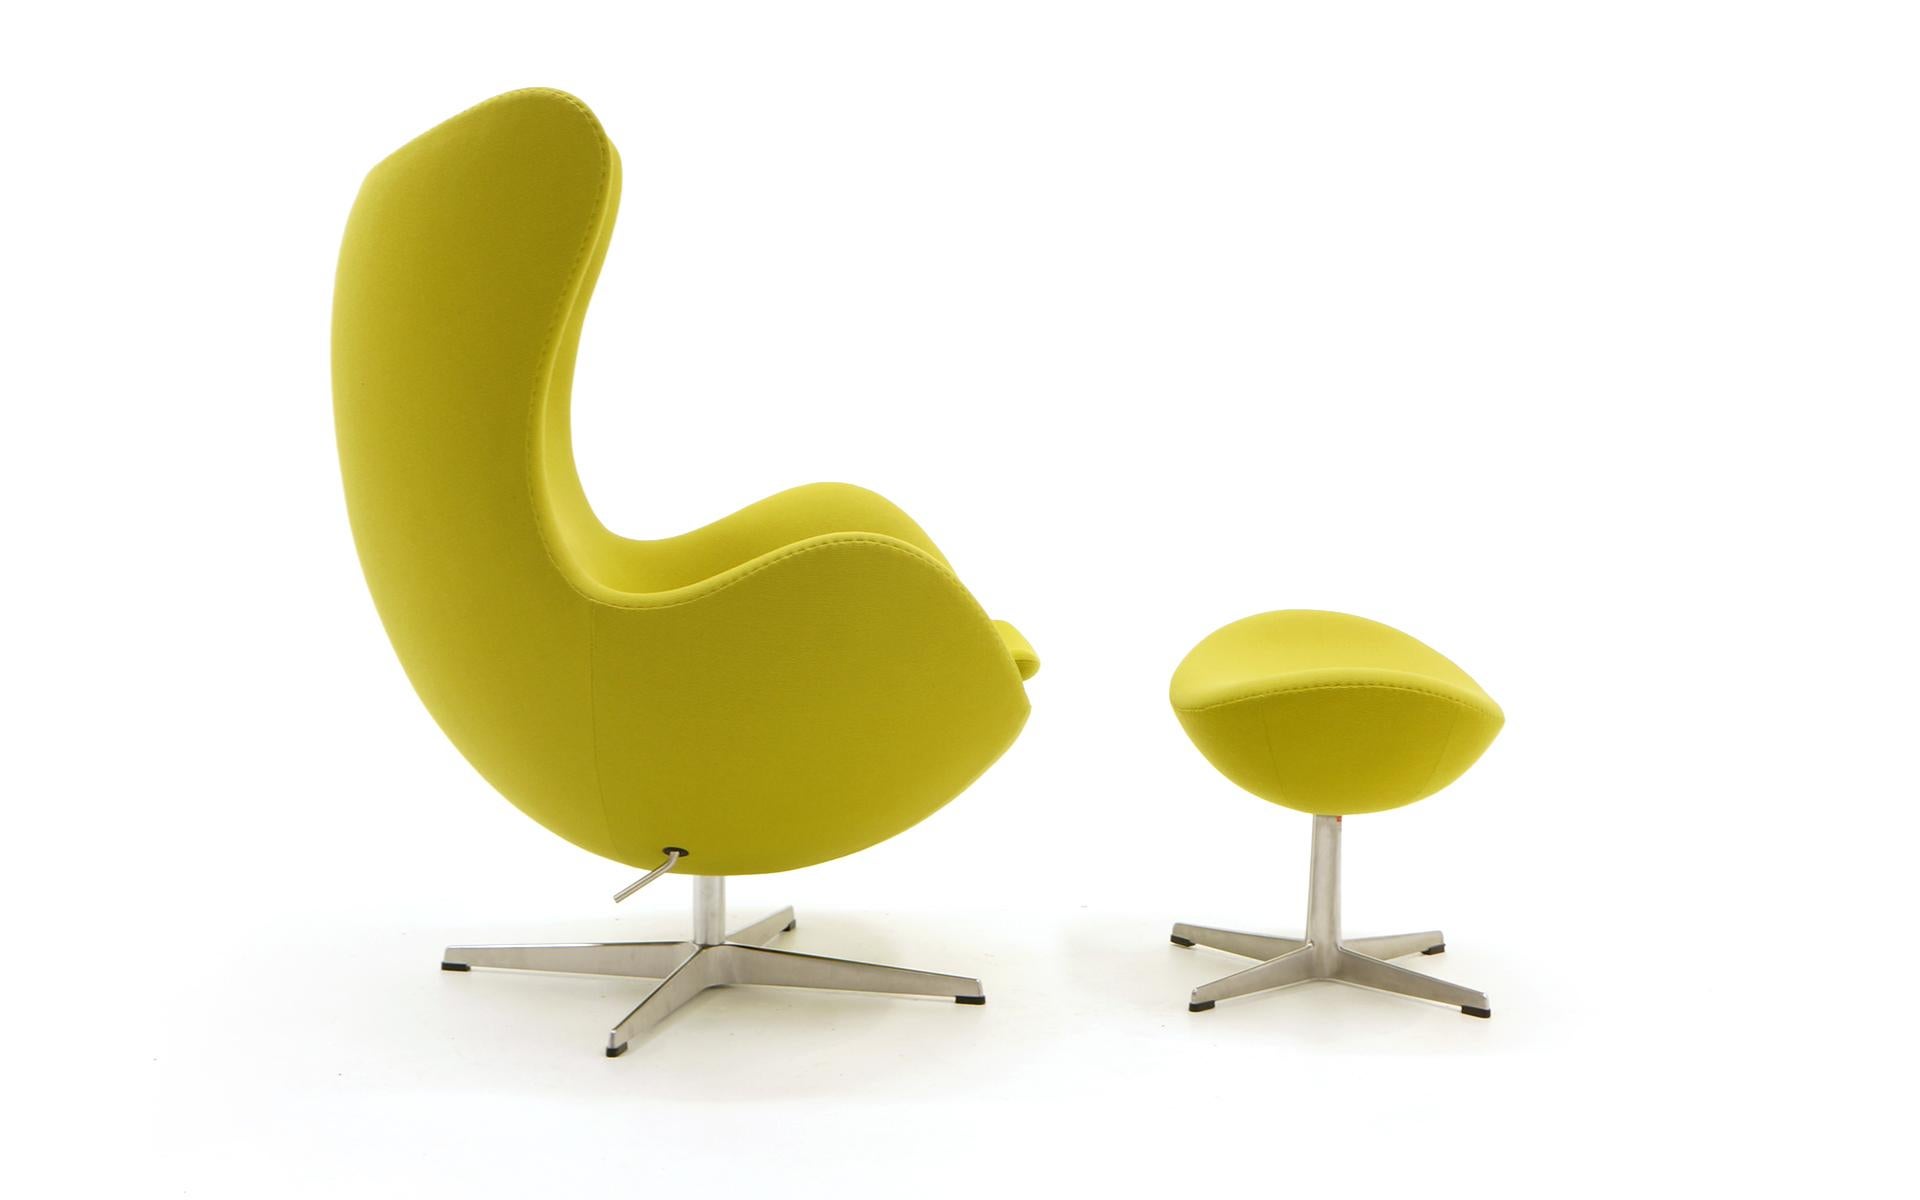 Original, authentic Arne Jacobsen Egg chair and ottoman made by Fritz Hanse, Denmark, 2008. Original chartreuse (yellow-green) fabric. The chair tilts and swivels making it very comfortable it recline.
Ottoman dimensions: 16.25 in. H x 15 in. D x